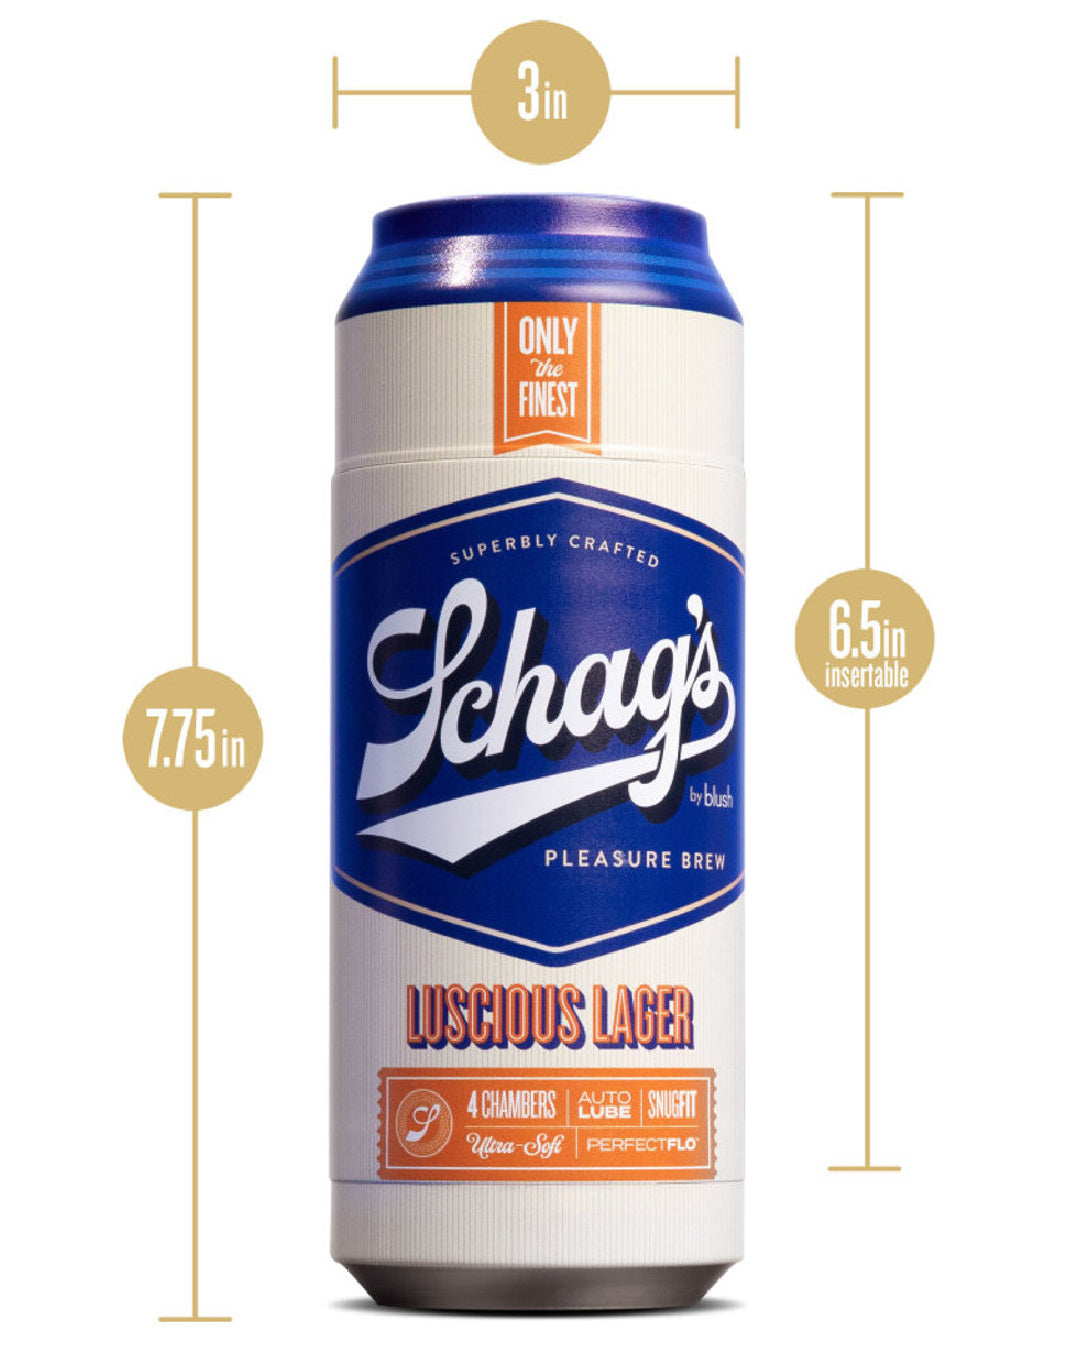 Schag's Luscious Lager Self-Lubricating Penis Stroker